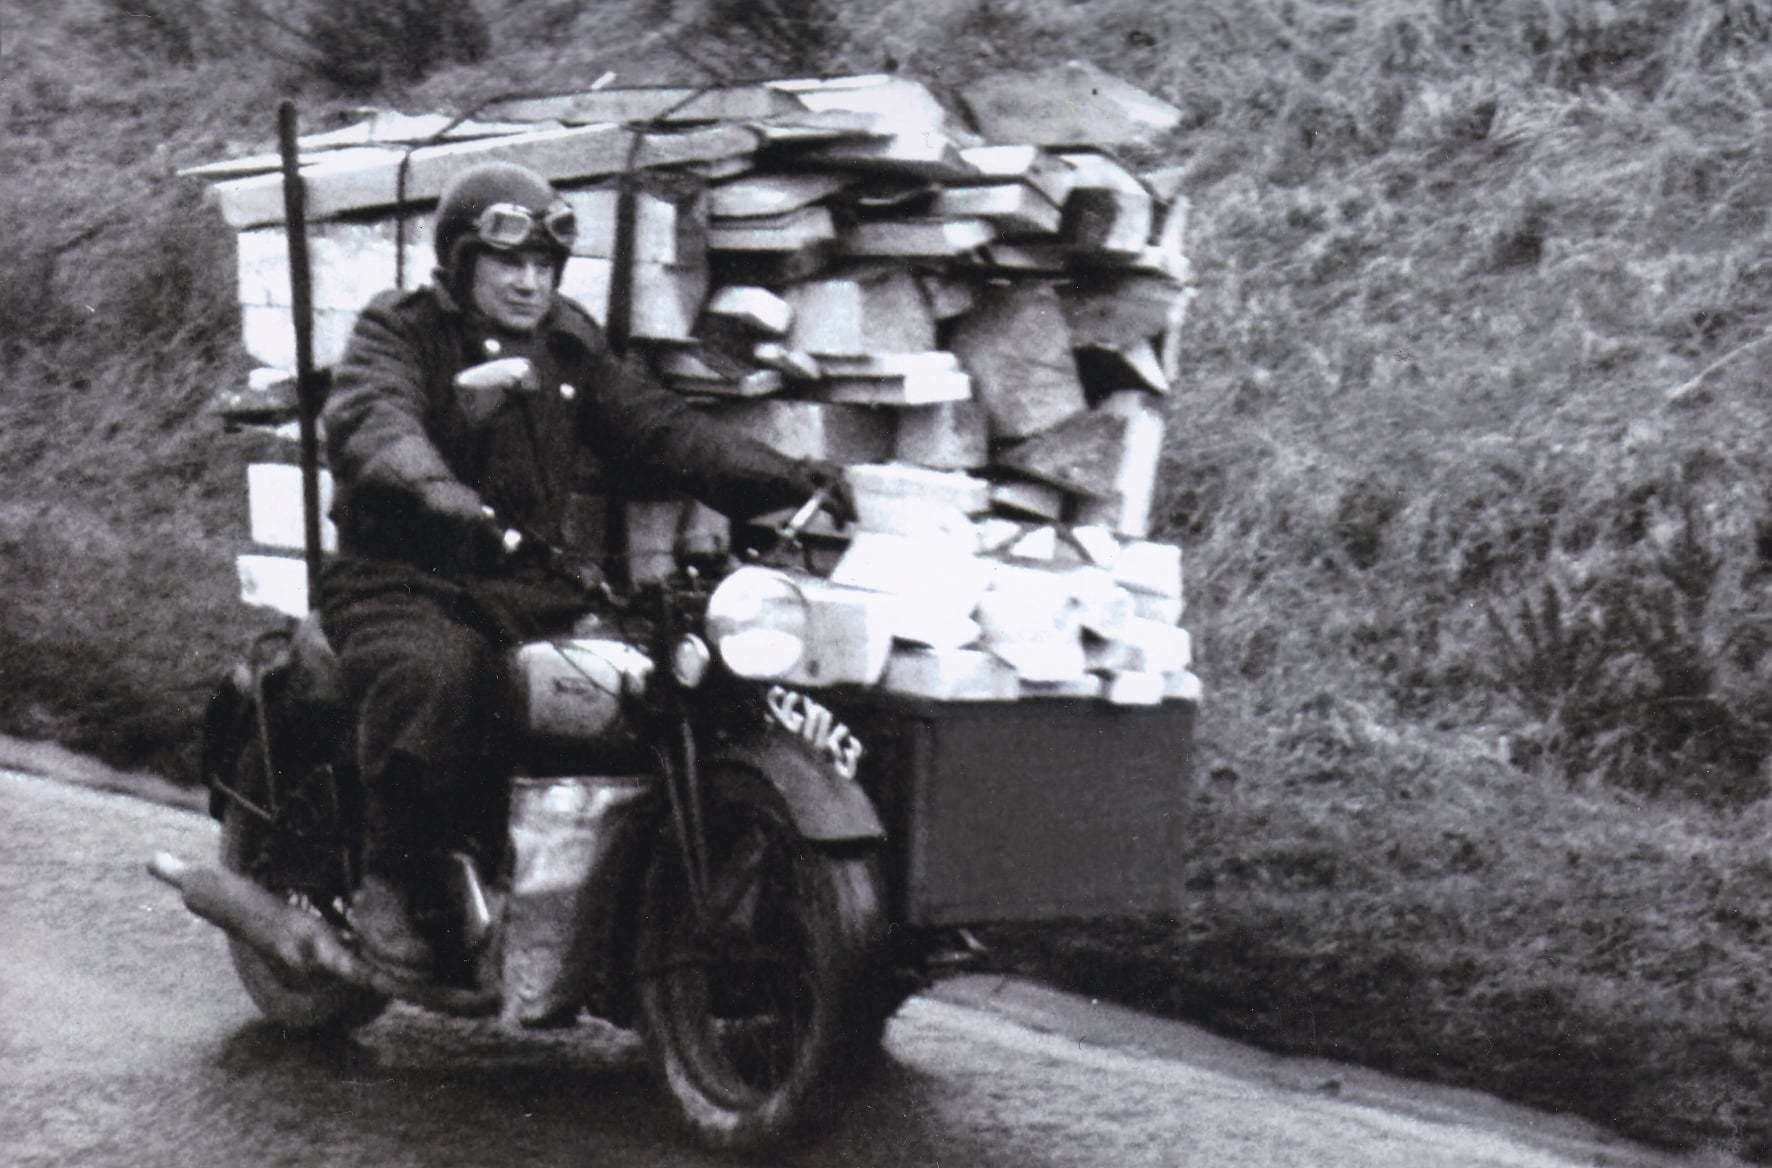 Norman Birse on his iconic Norton motorbike delivering firewood.